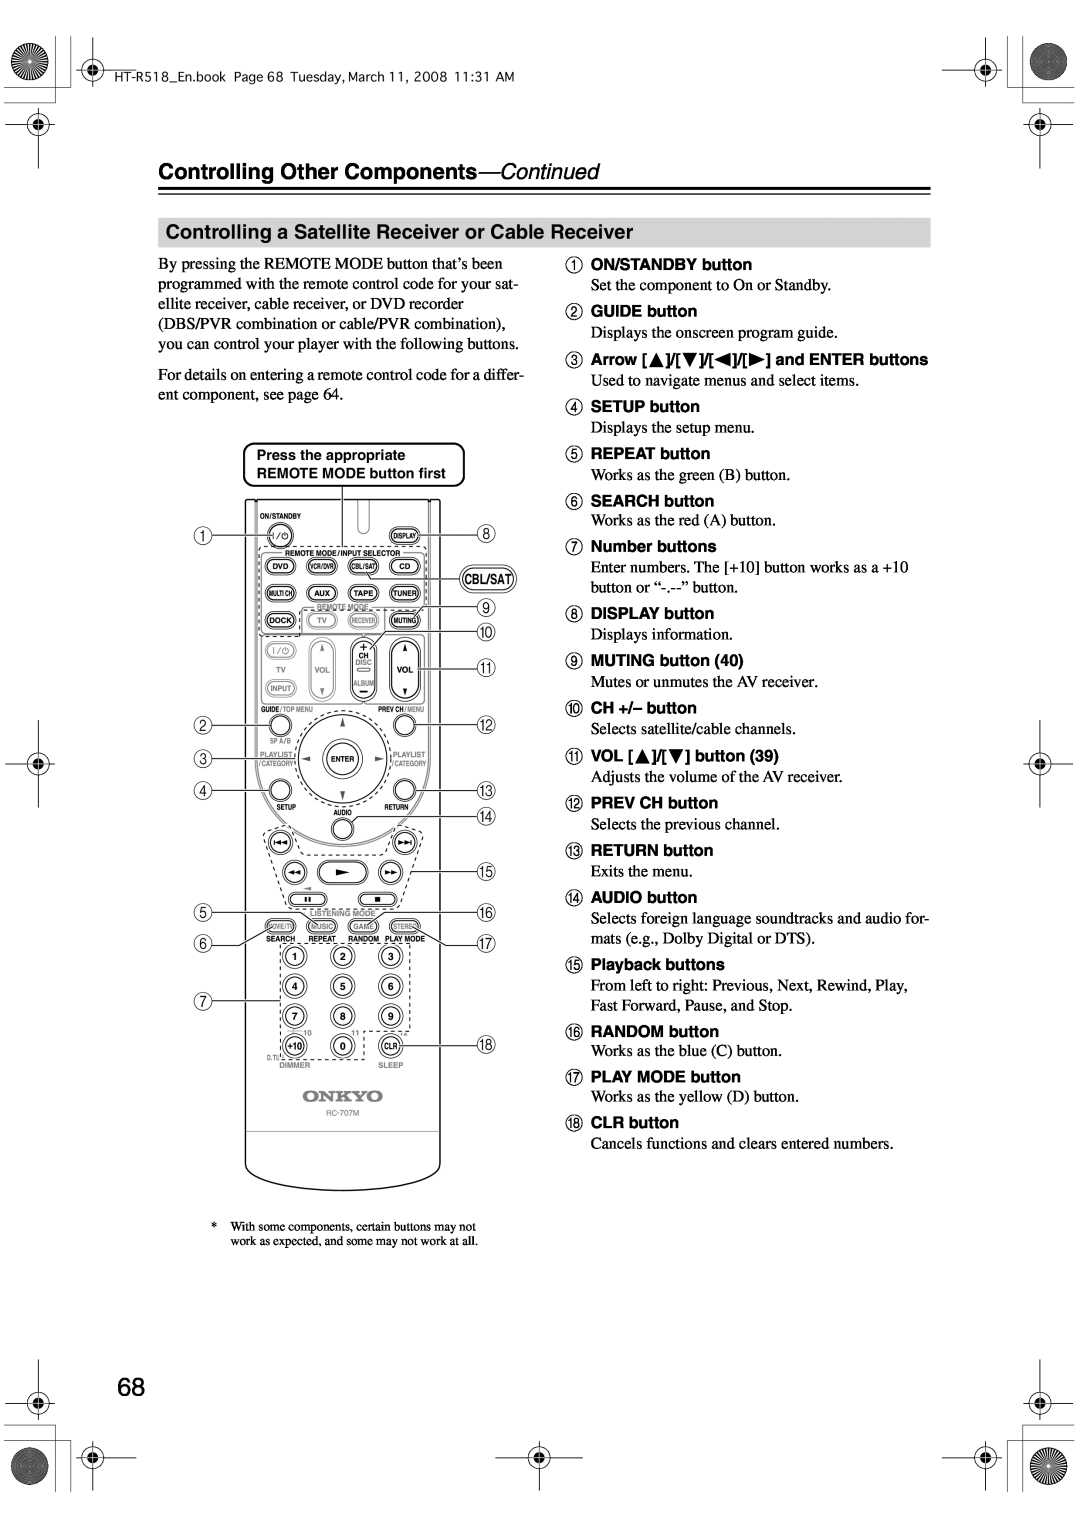 Onkyo HT-R518 instruction manual Controlling Other Components-Continued, AON/STANDBY button 